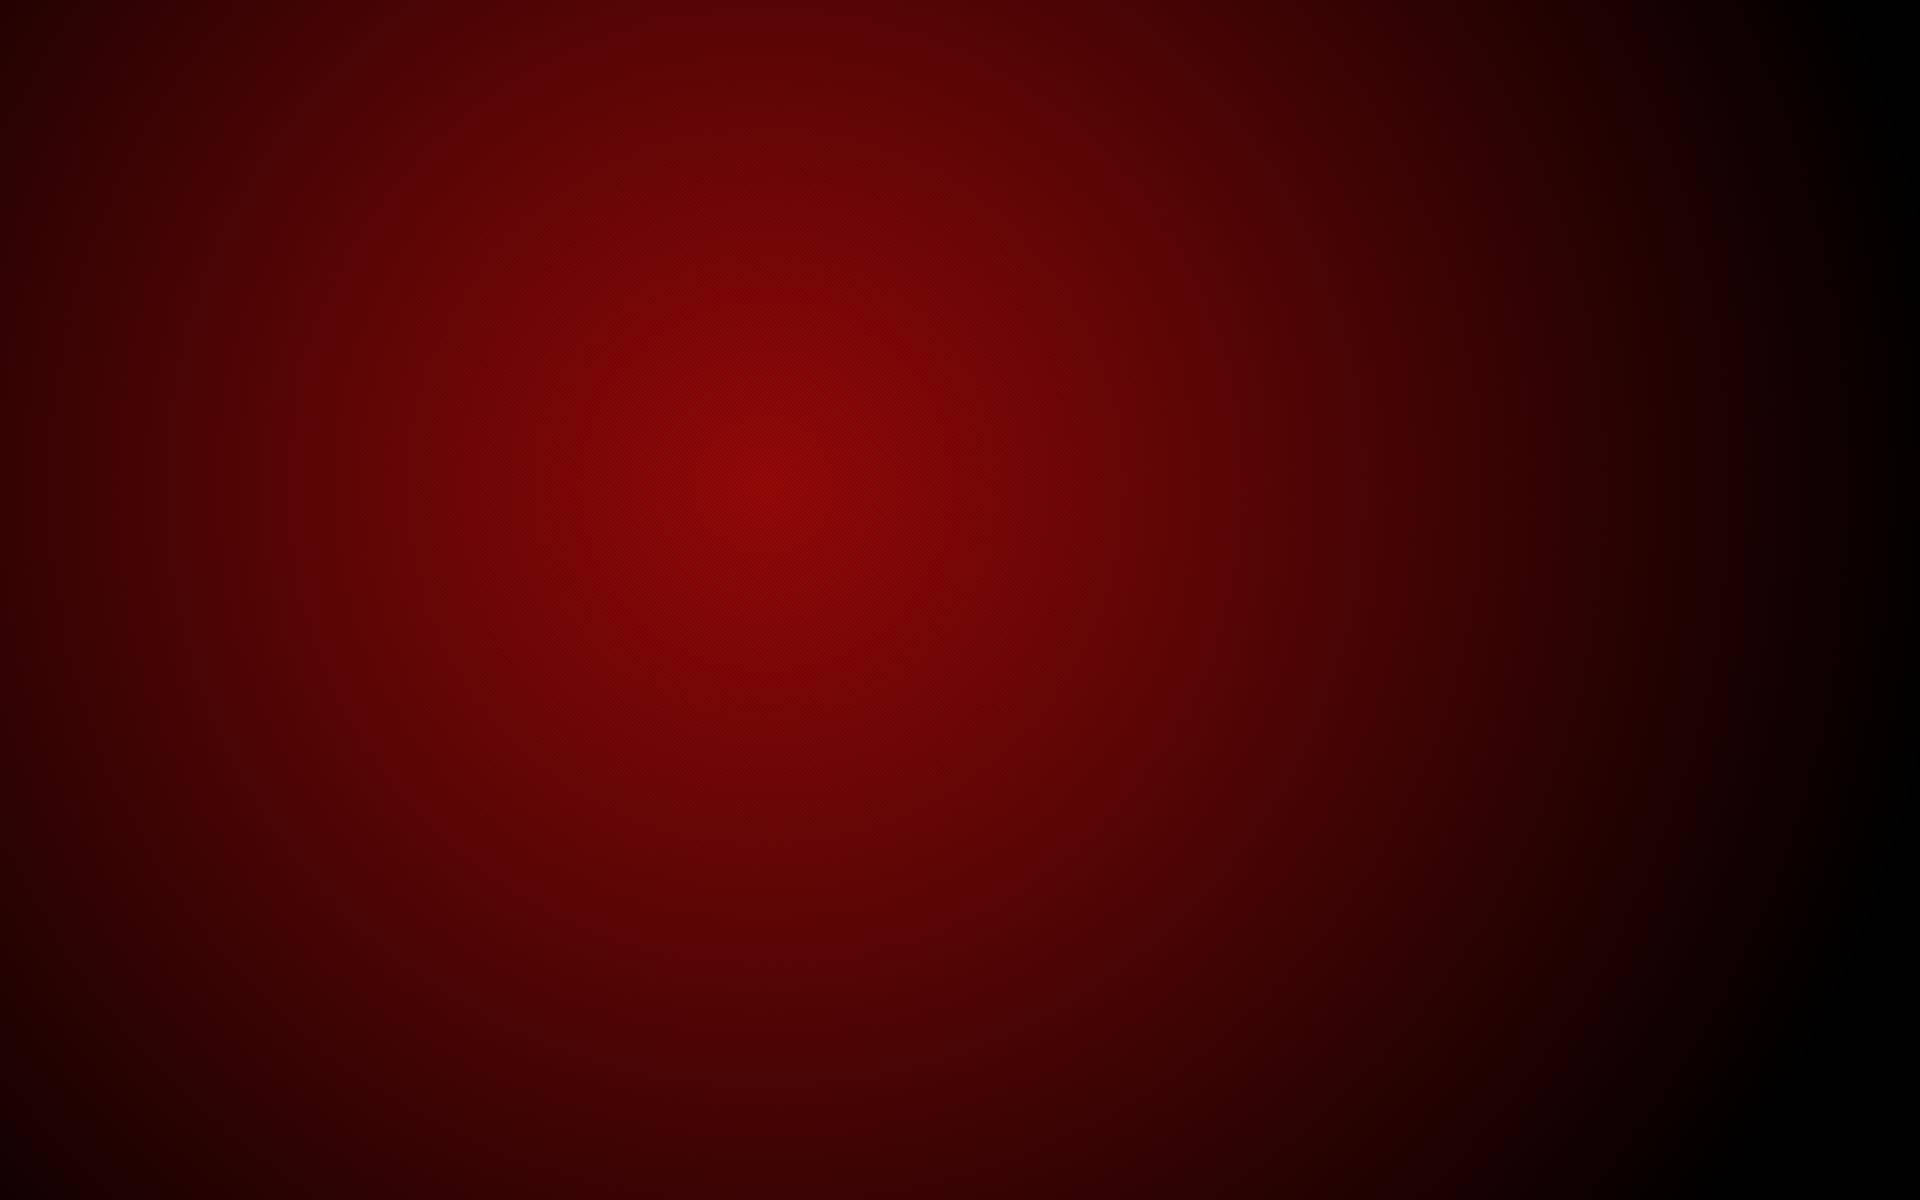 Plain Red And Black Gradient Wallpaper